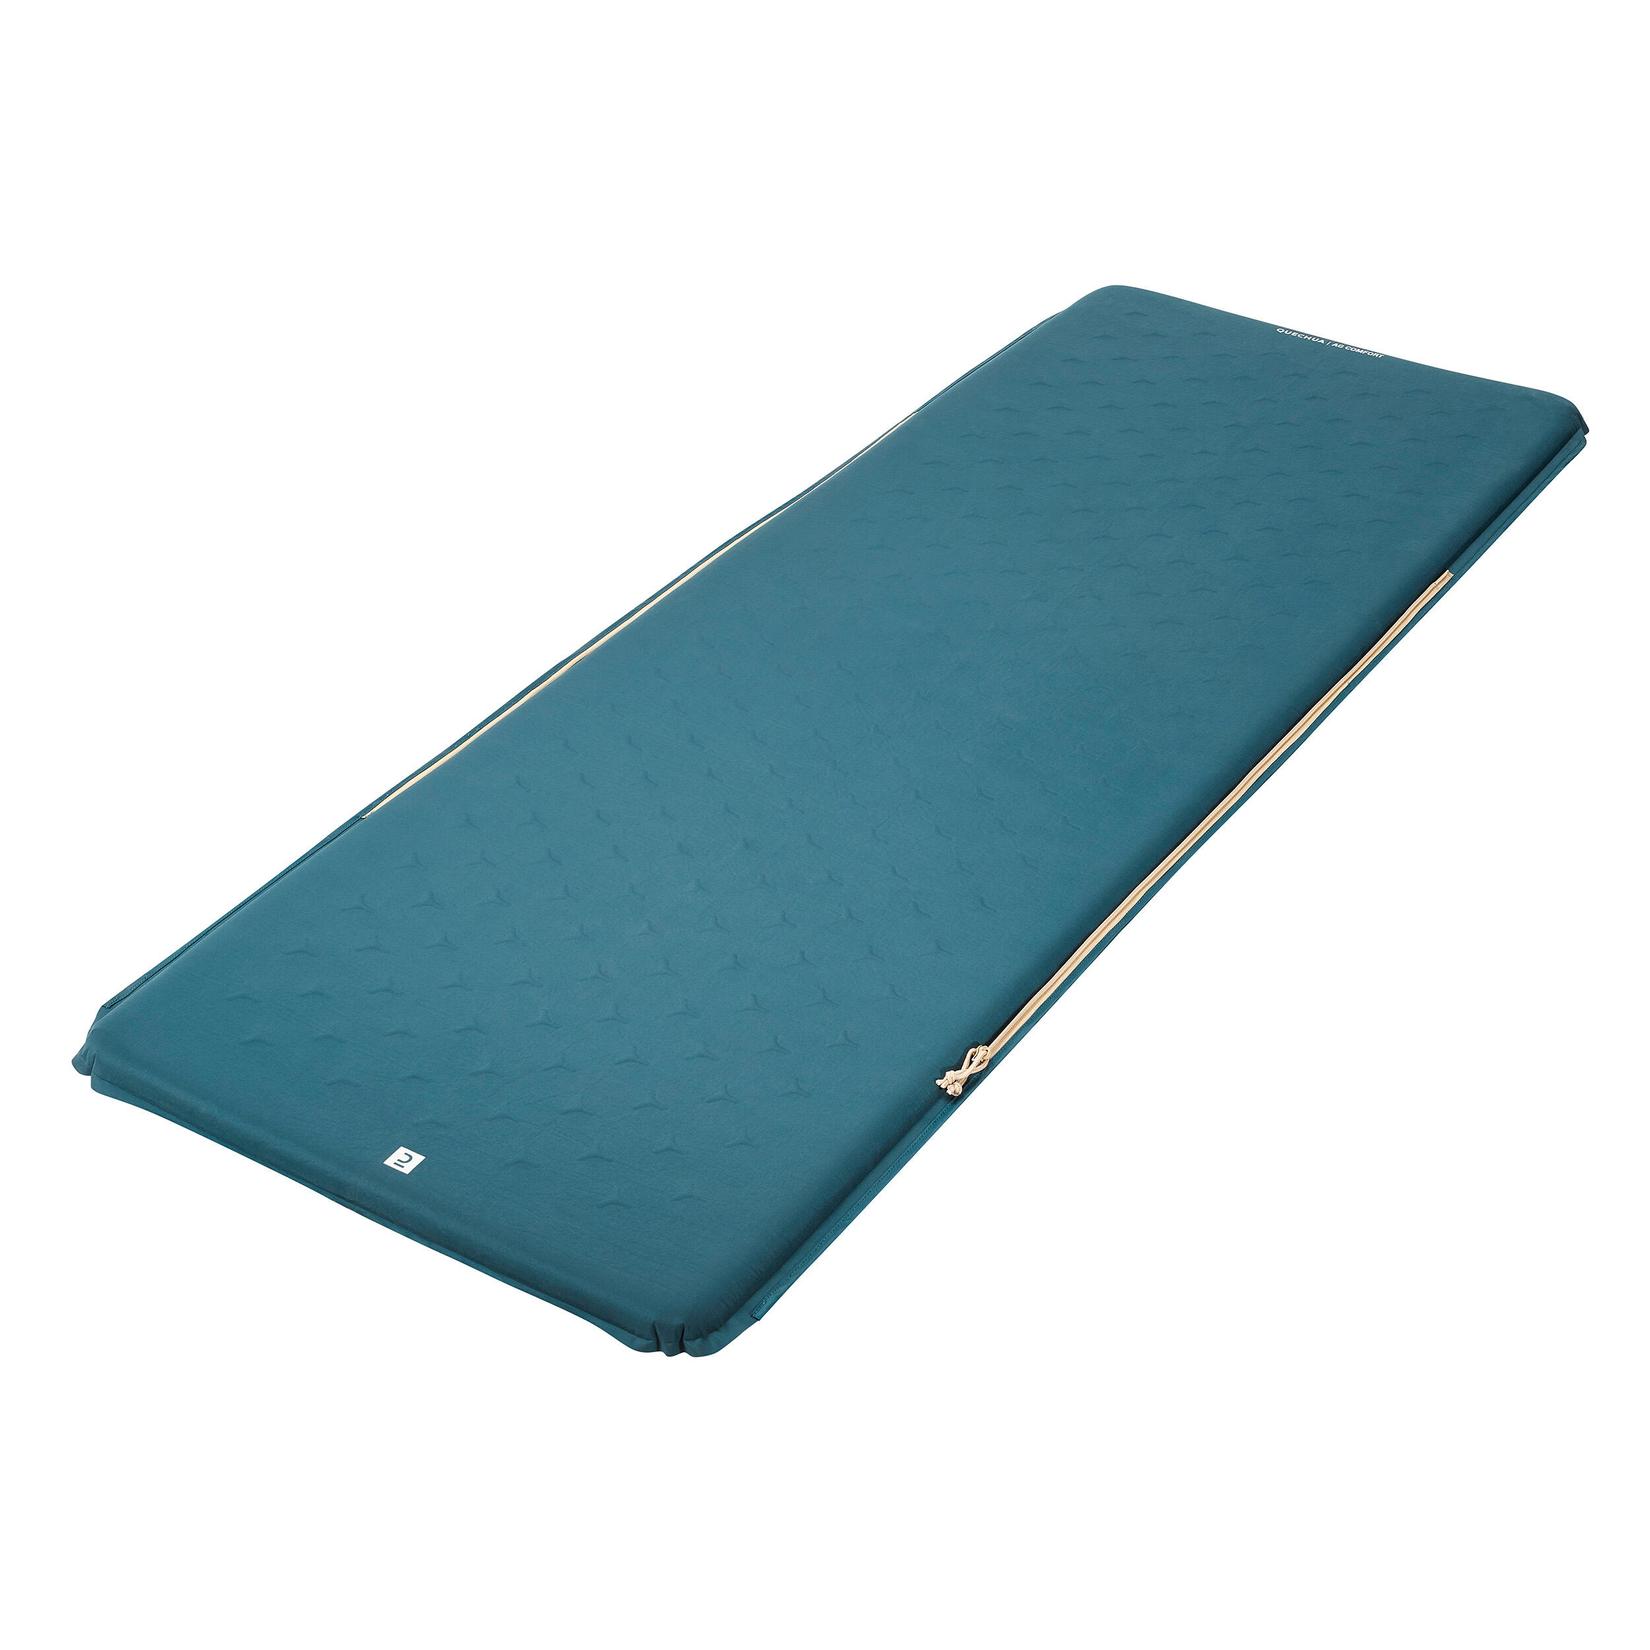 Single Self-Inflating Camping Sleeping Mat 190 x 65 cm - AG Confort offers at $75 in Decathlon